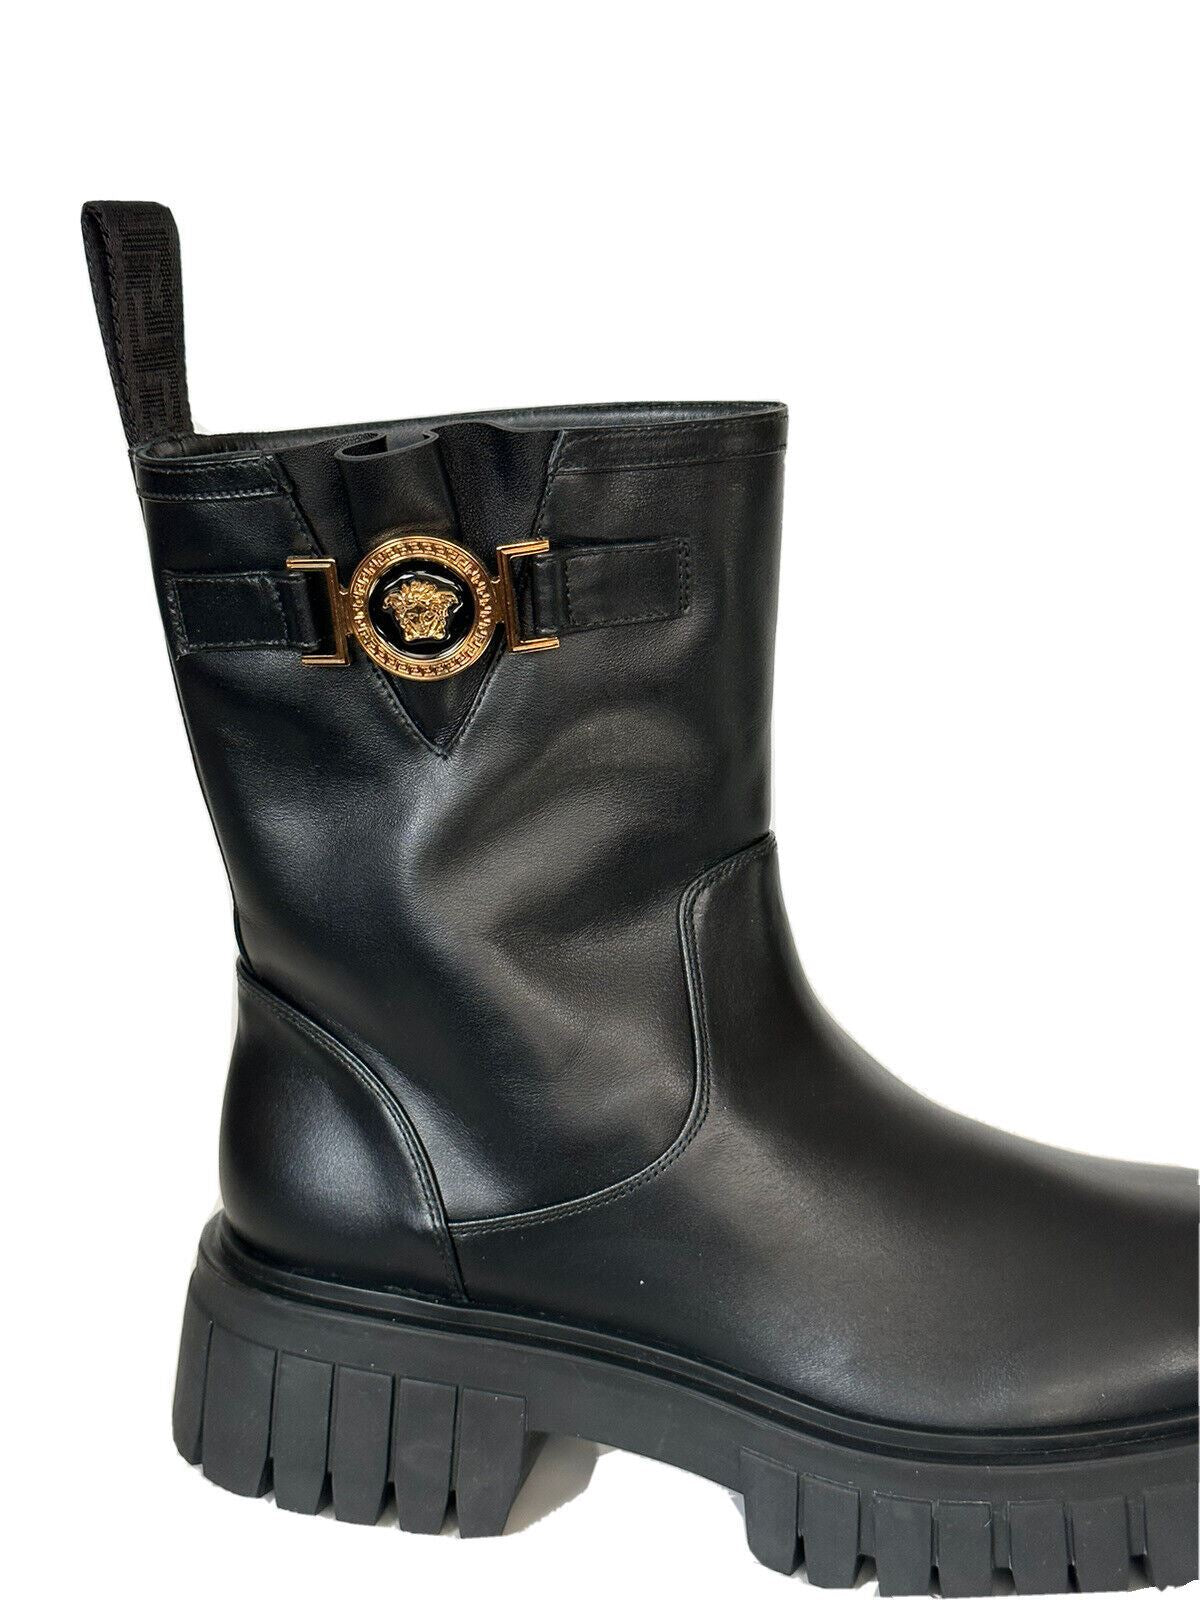 NIB $1300 Versace Leather Black Leather Ankle Boots 8 US (38 Euro) 1002863 Spain